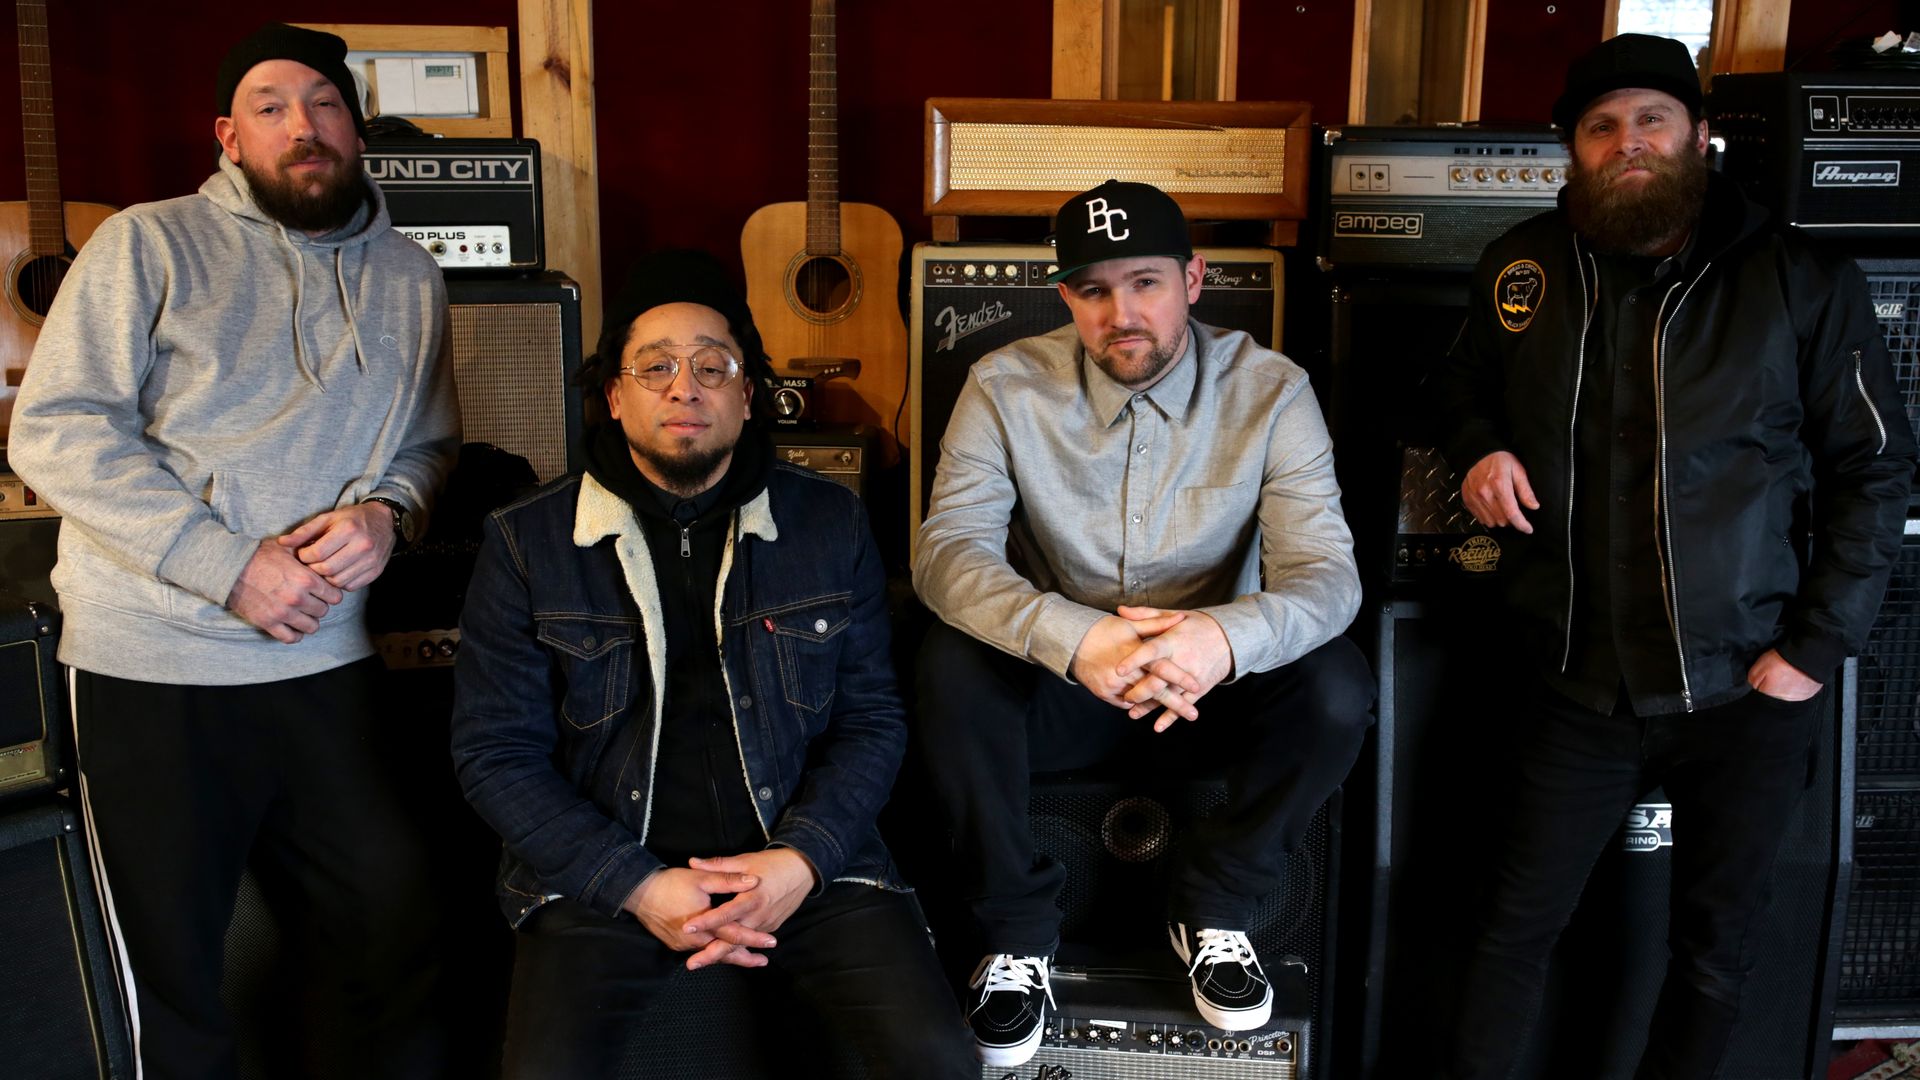 Christopher Talken, Moe Pope, The Arcitype and Jonathan Ulman (left to right) of STL GLD pose for a photo in front of some amps.